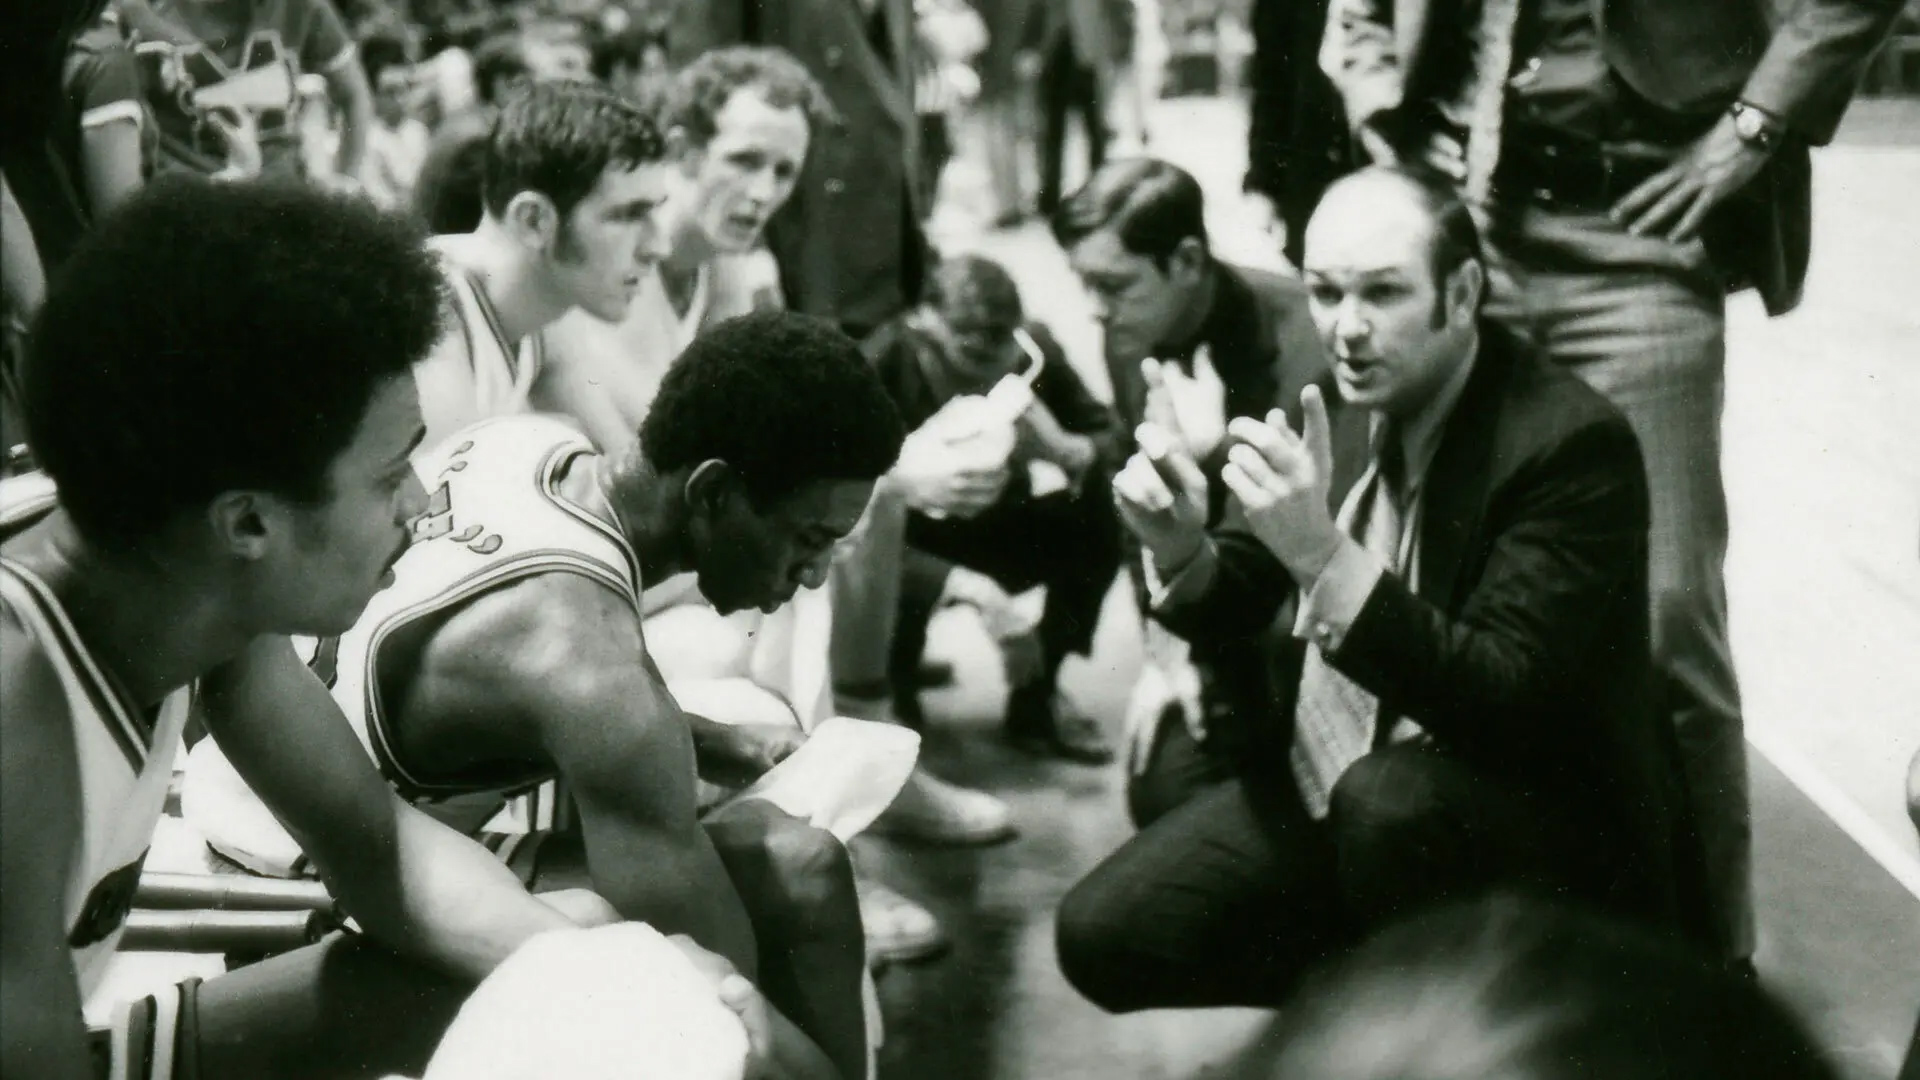 Charles "Lefty" Driesell huddles with players in a January 1971 game against South Carolina. Driesell racked up a 348-159 record with the Terps, and his 786 career victories still rank 15th all-time among all NCAA Division I coaches. Photo courtesy of University Archives.